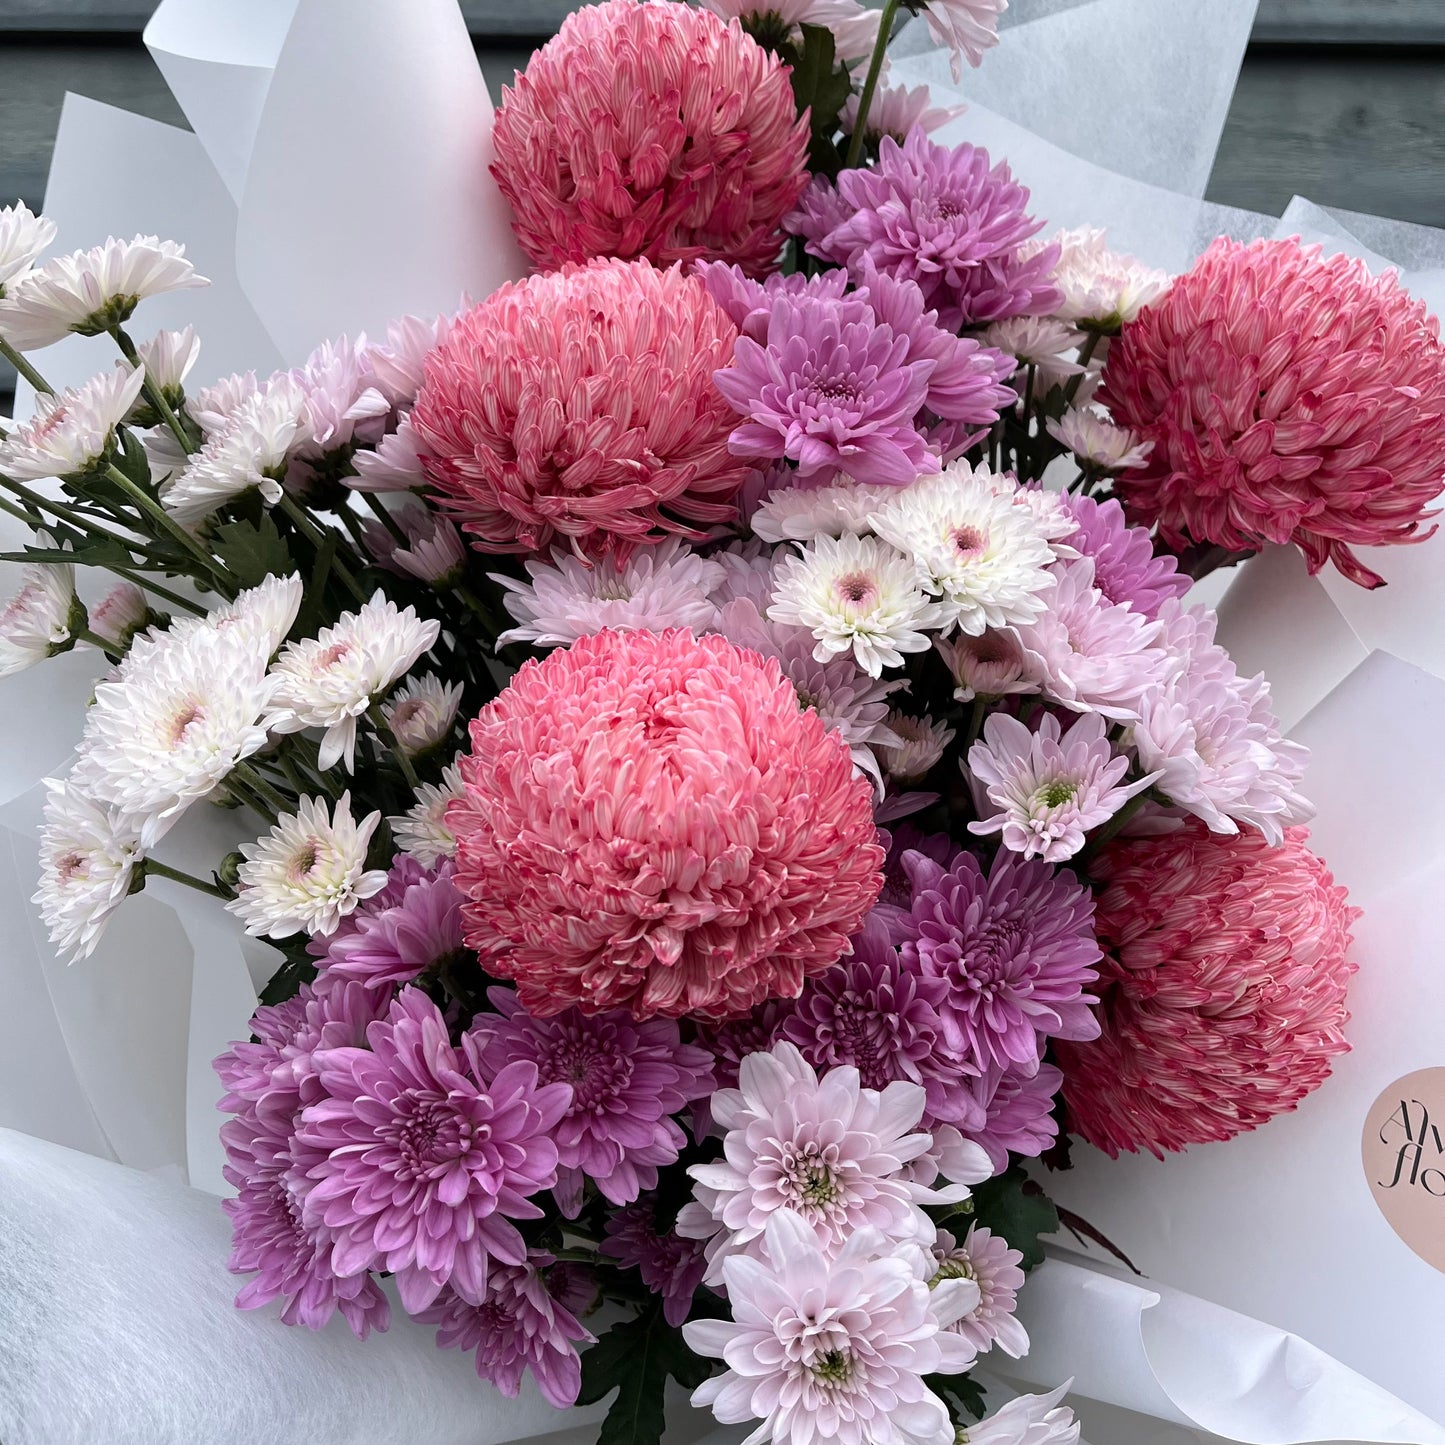 Mums for Mum - Mother's Day